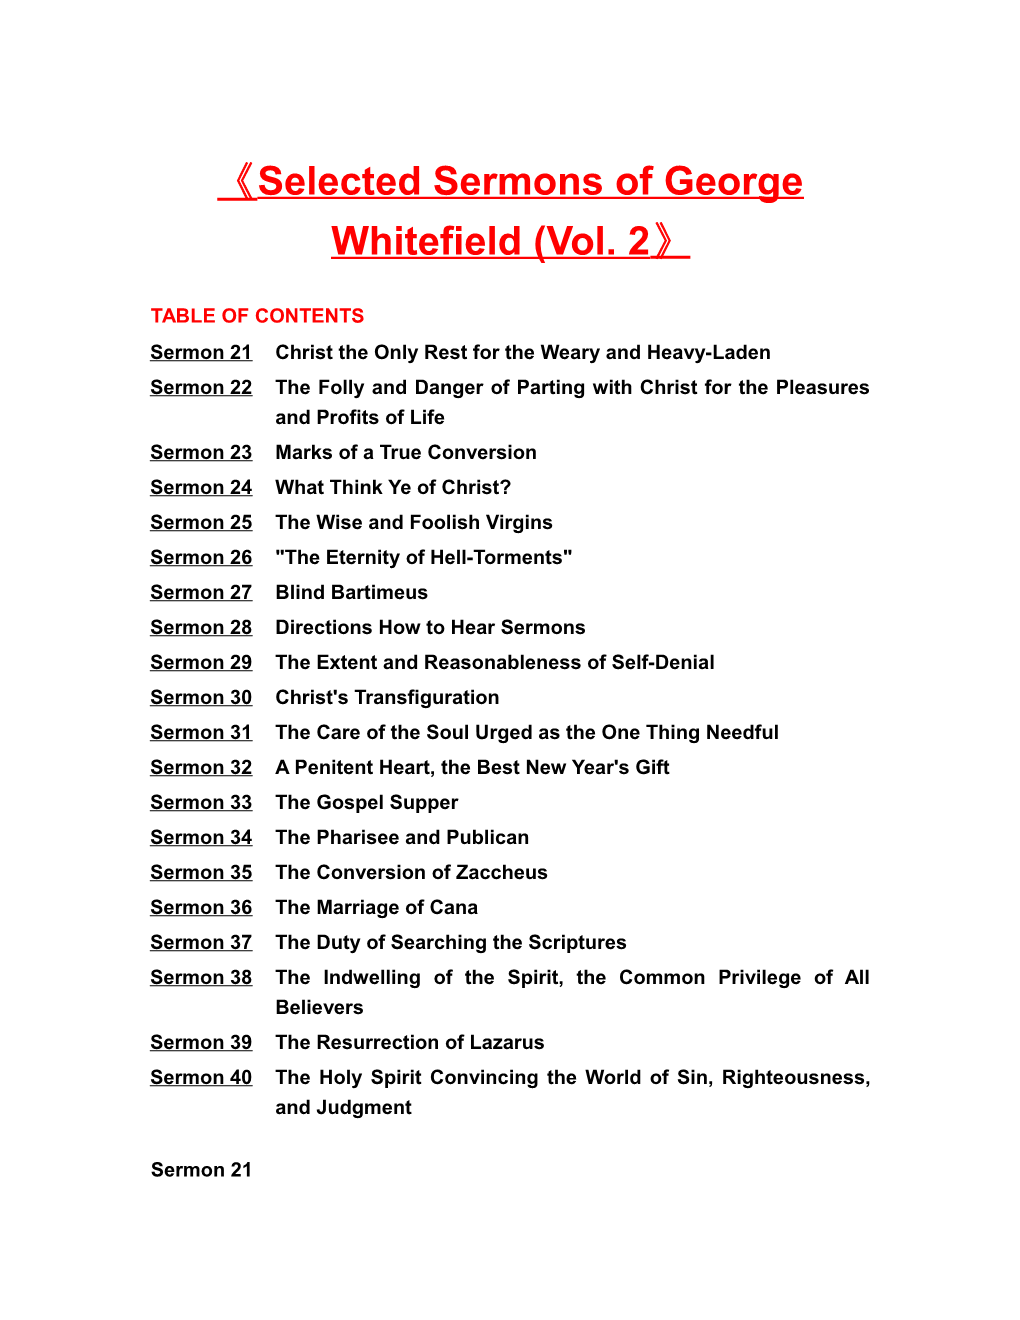 Selected Sermons of George Whitefield (Vol. 2